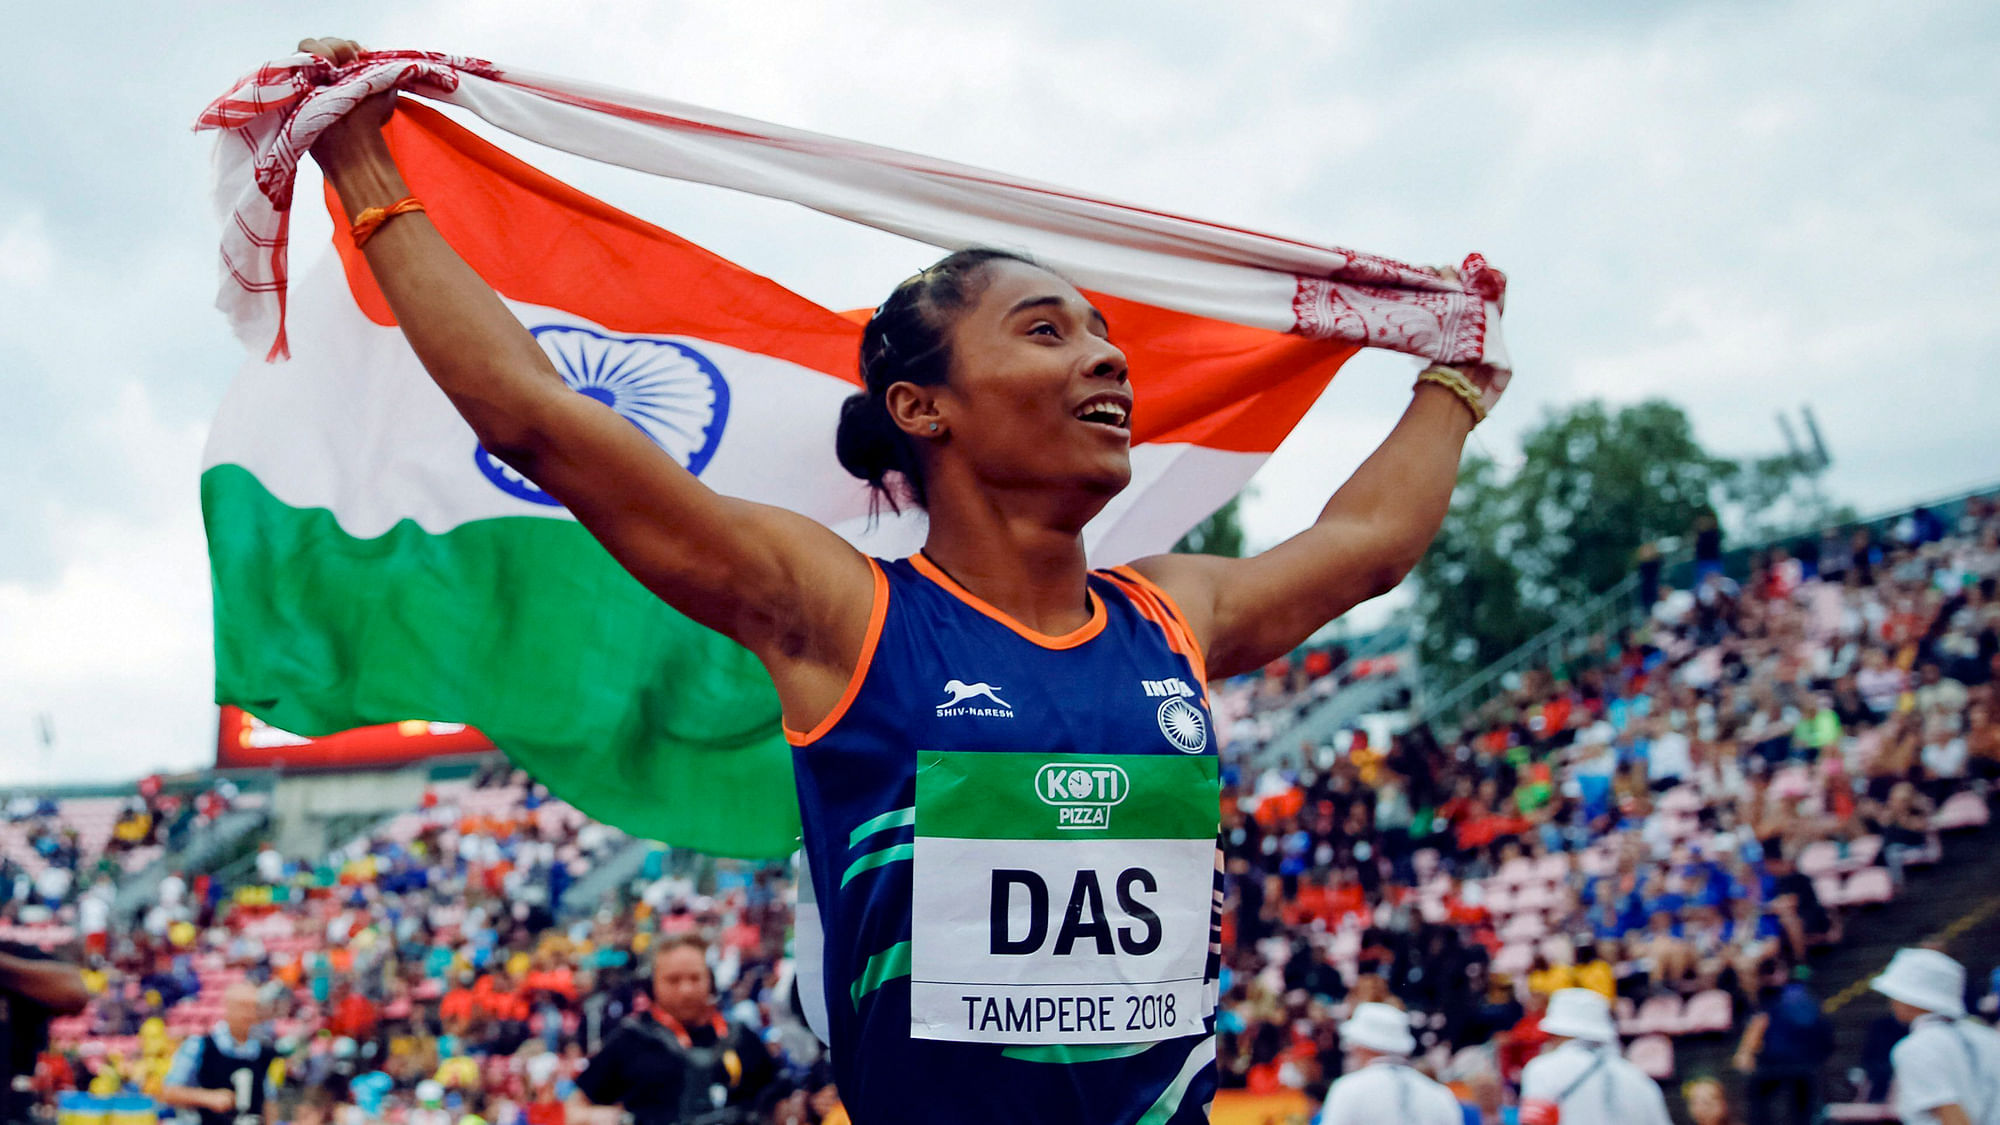 Hima Das won a gold medal for India in the 400m event at the IAAF Under20 World Championships.